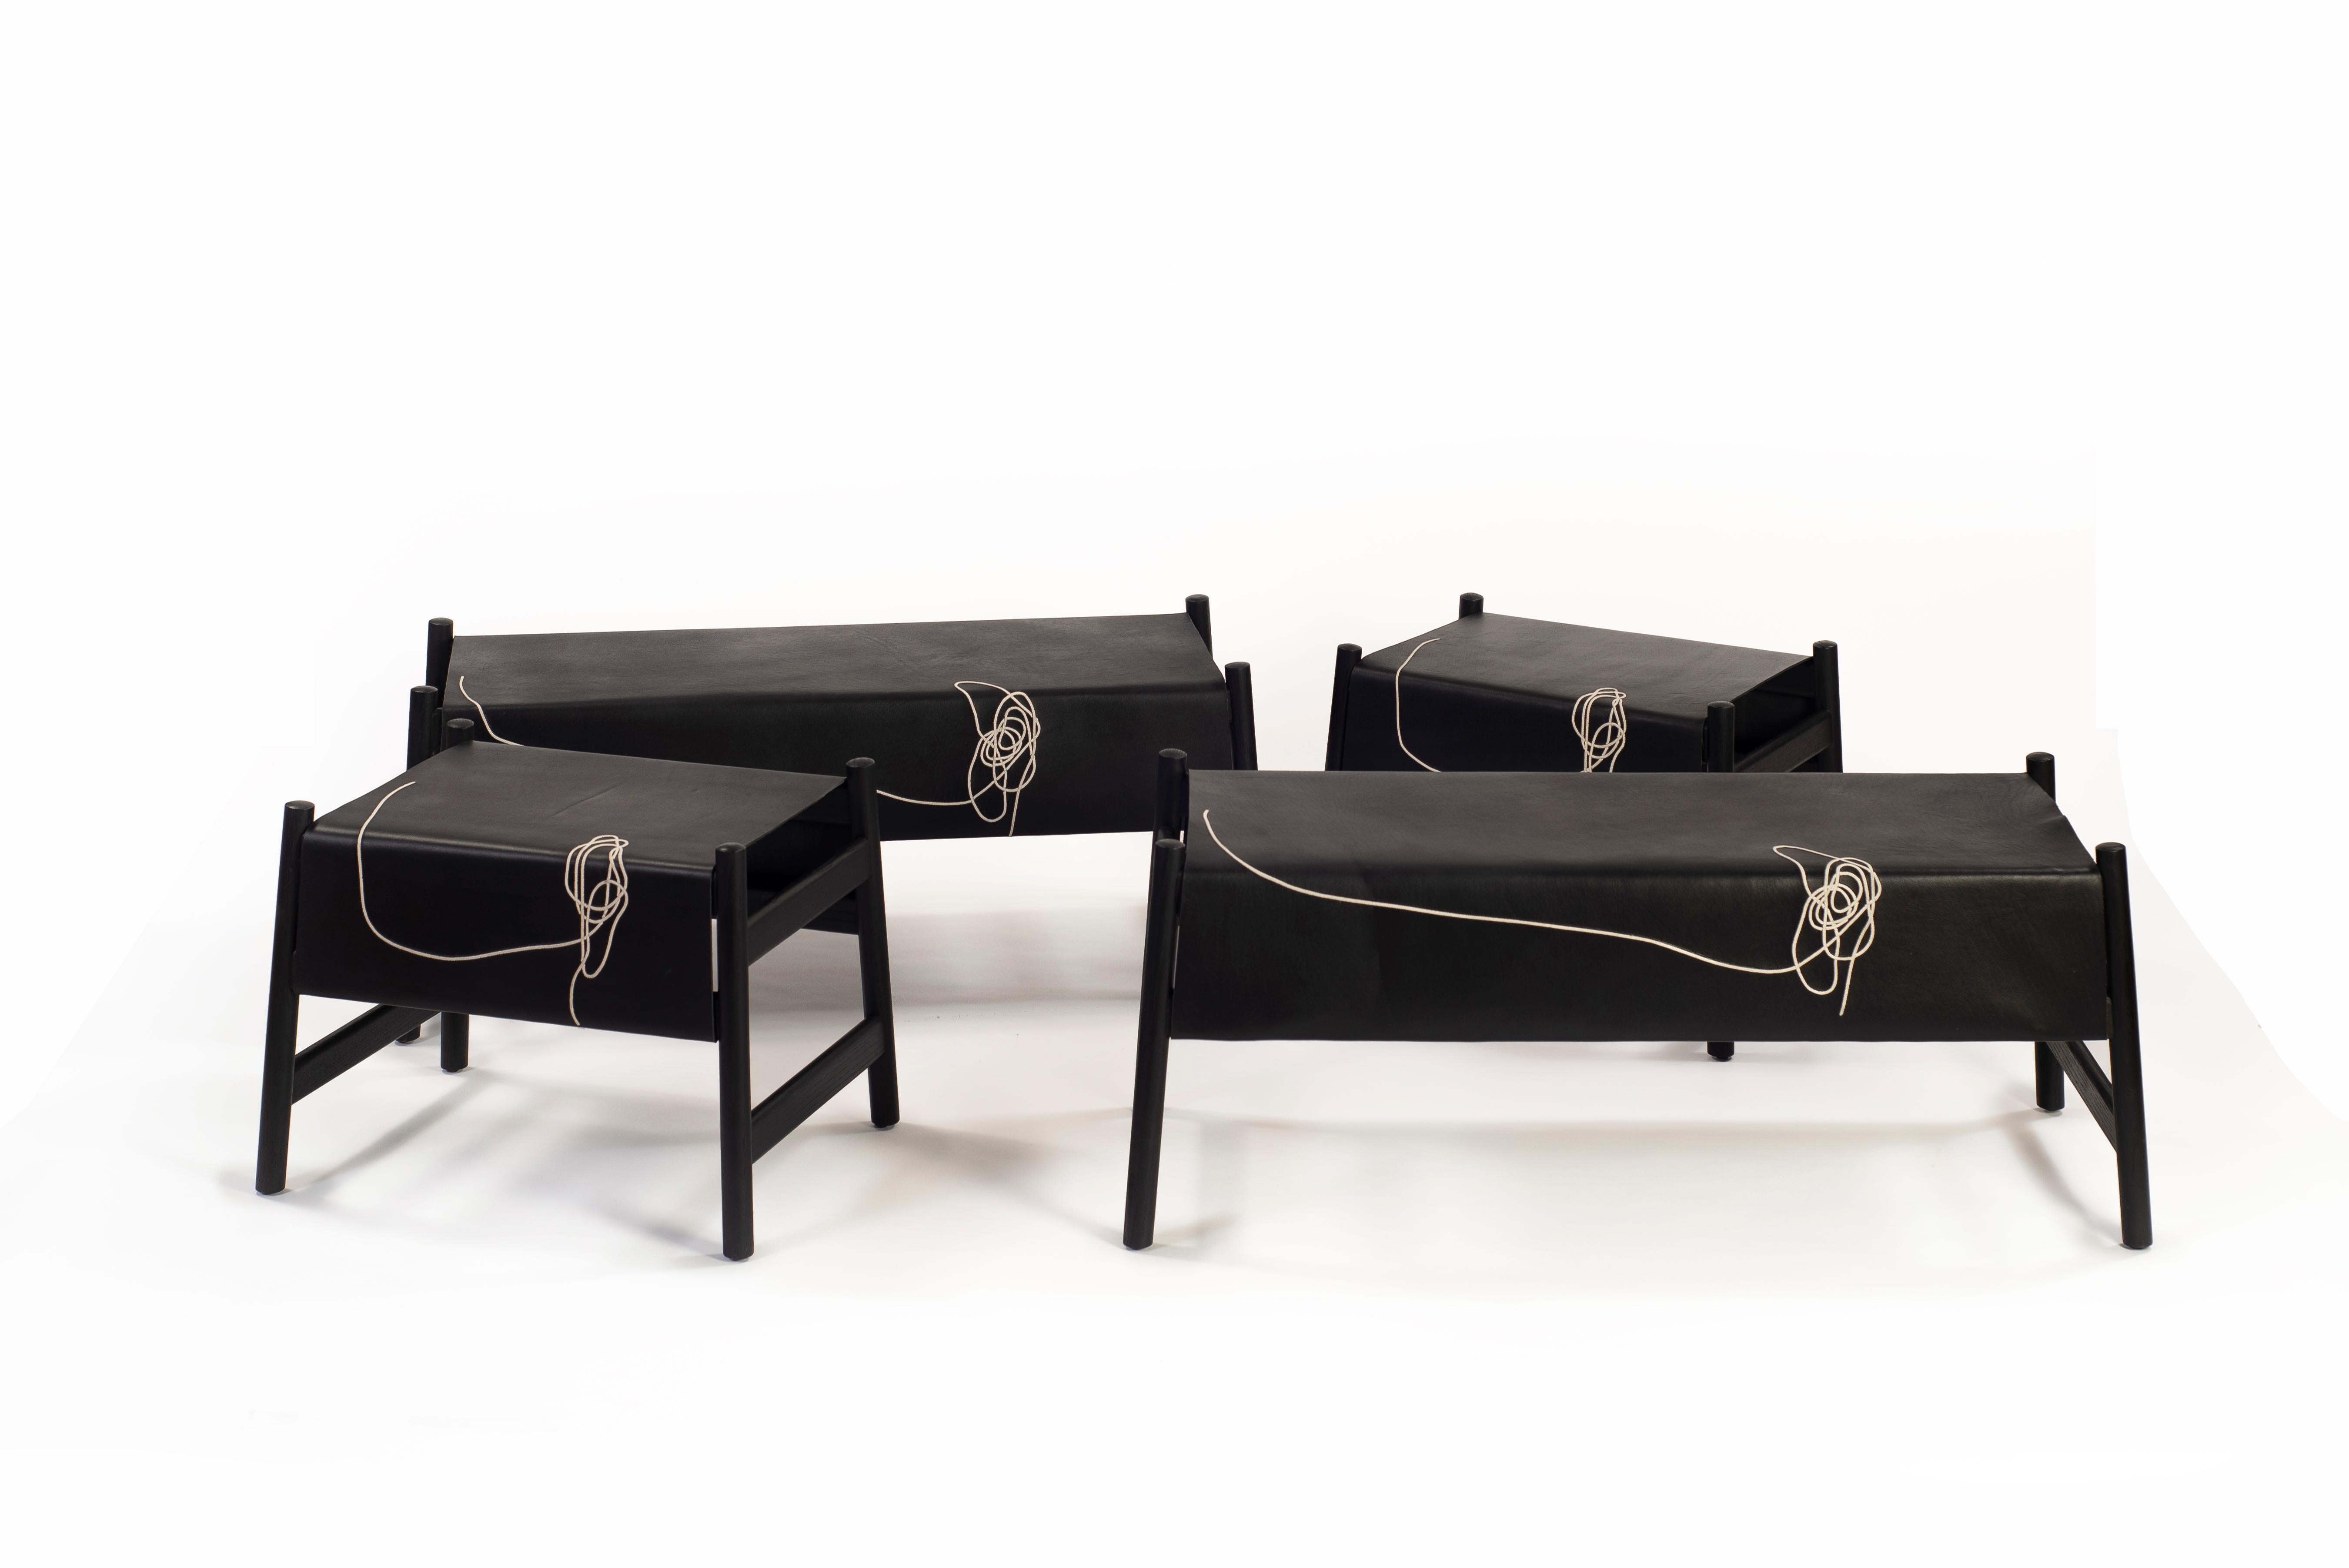 Blackened Trazo Black Cowhide Bench, Oak Wood and Maguey Fiber For Sale